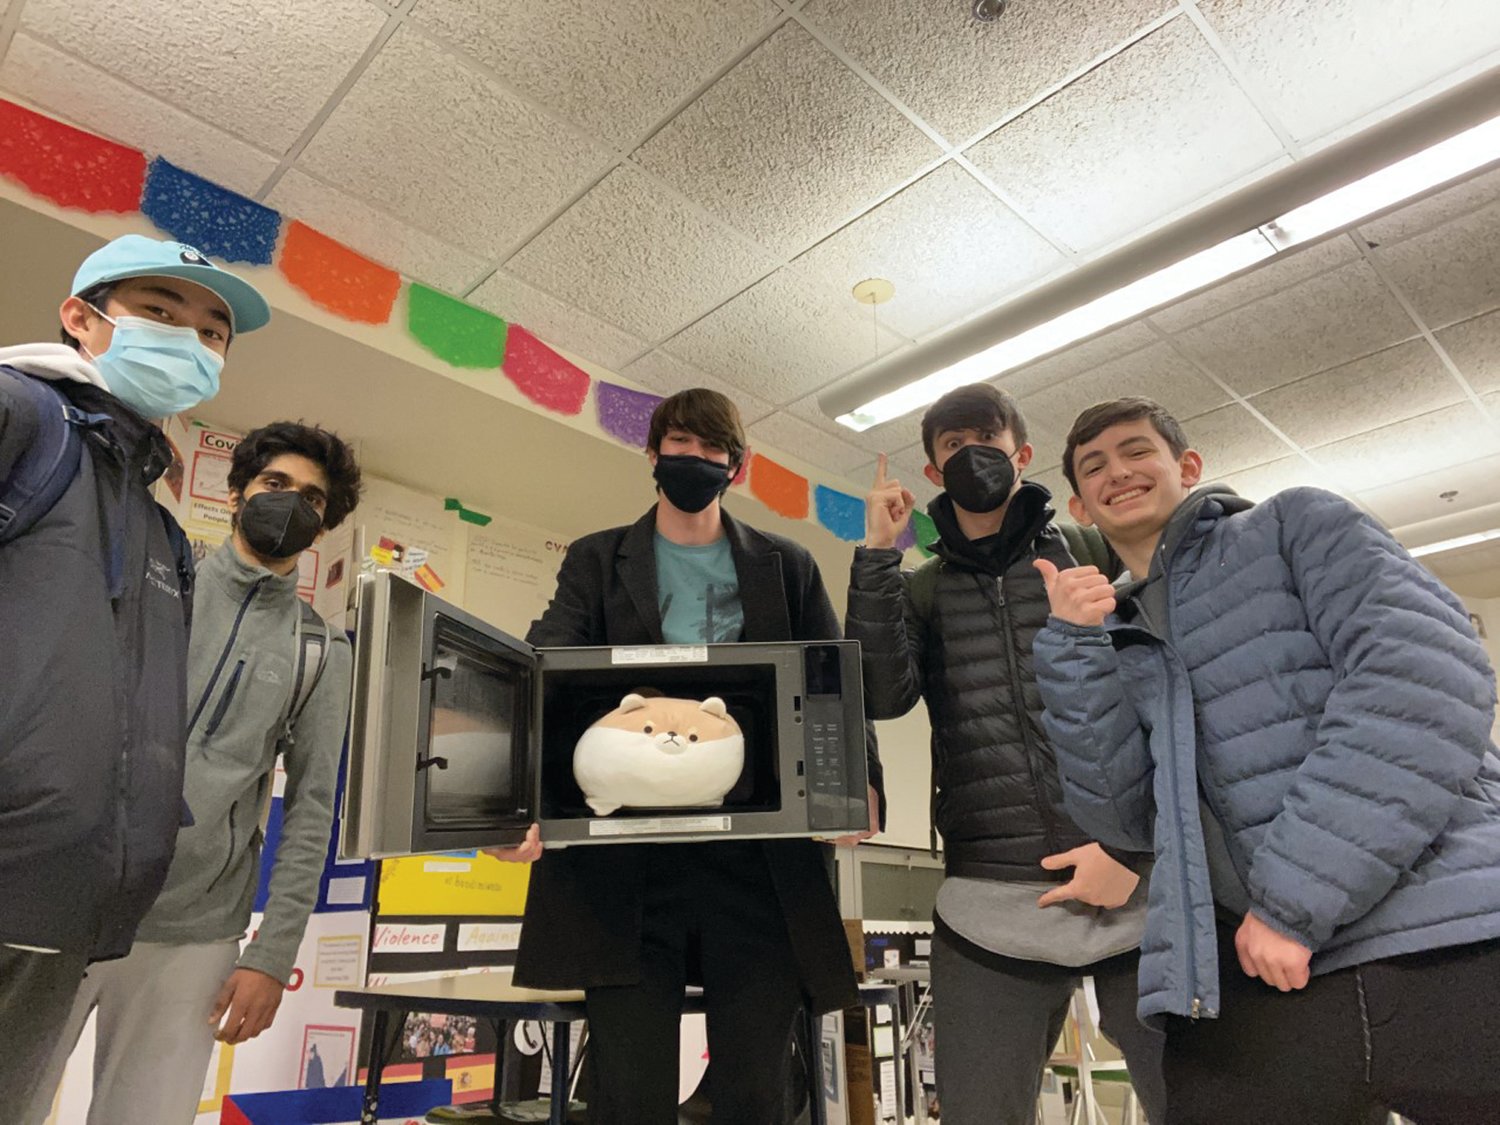 BRINGING THE HEAT: (left to right) Neil Joesph Dungca Jr., Atul Thyvalappil, Samuel Alexander Warr, Jacob Rademacher, and Aaron Lewis prepare for the long challenge with a microwave to help them prepare food for the next 14 hours.